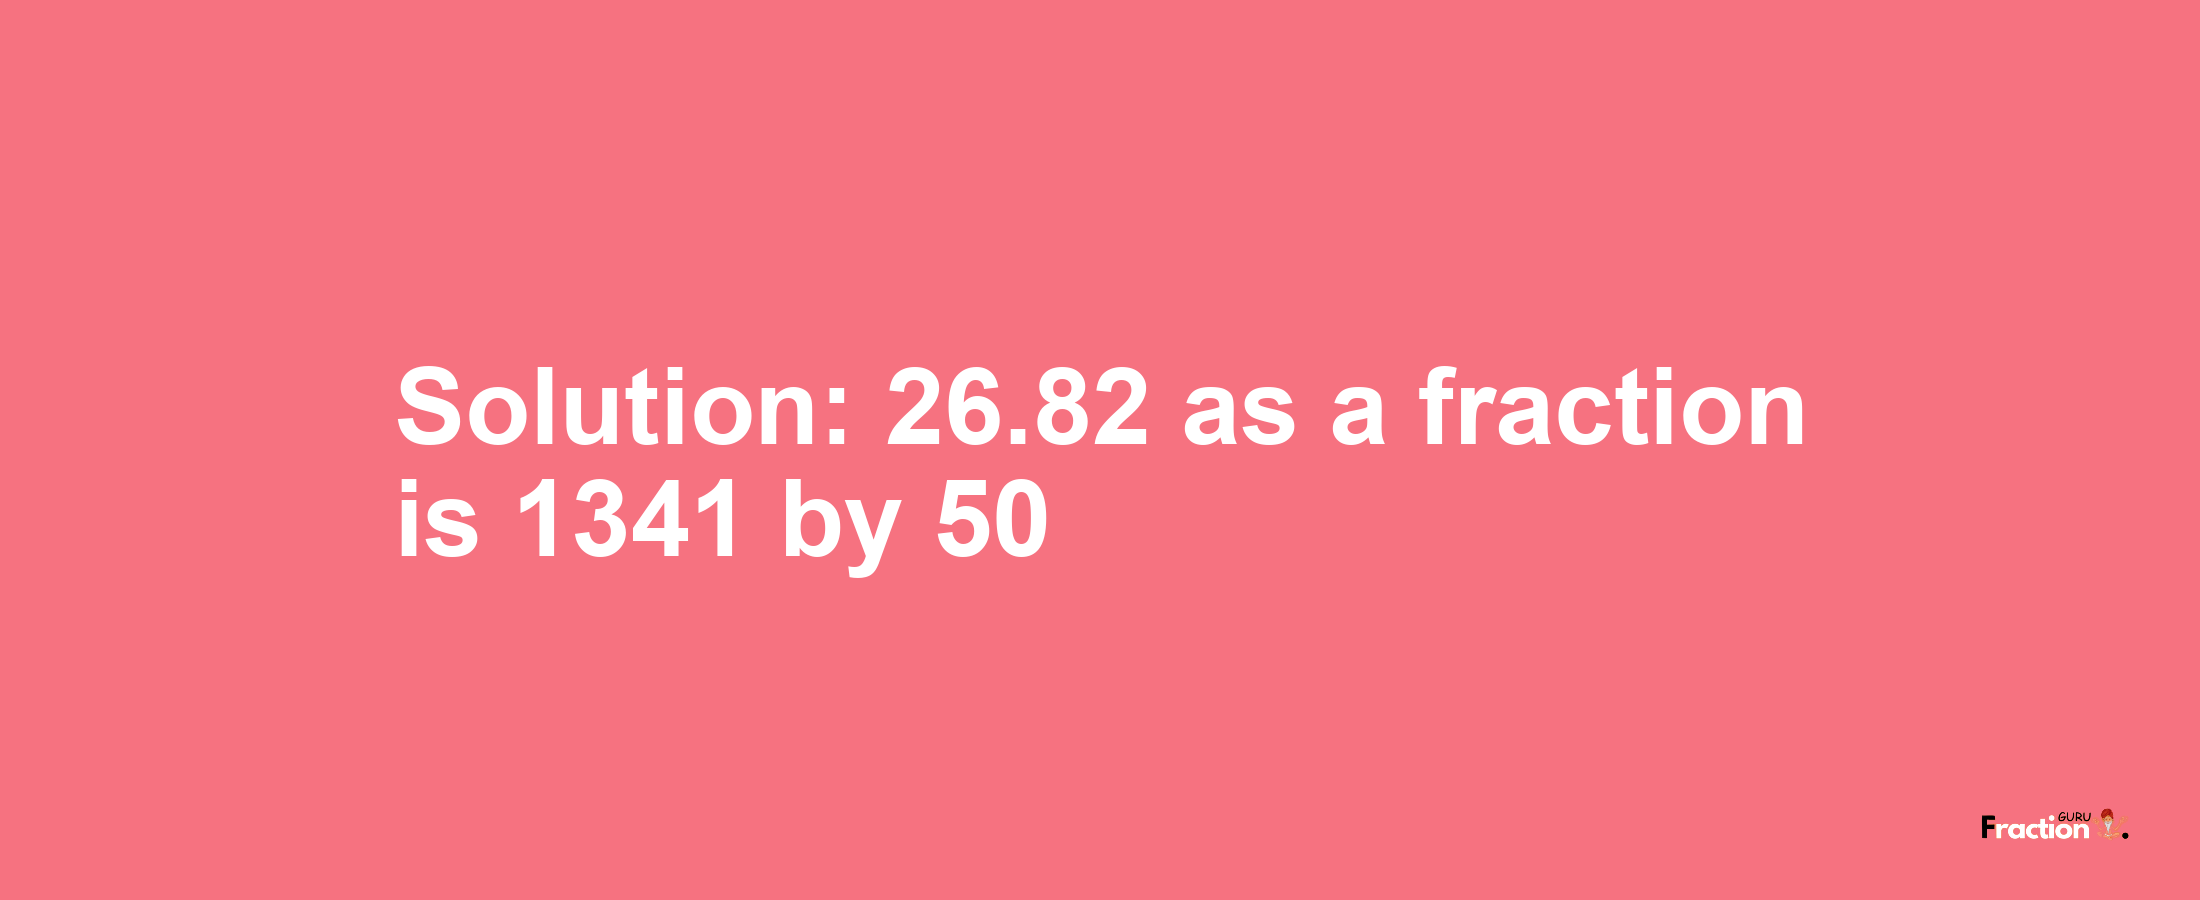 Solution:26.82 as a fraction is 1341/50